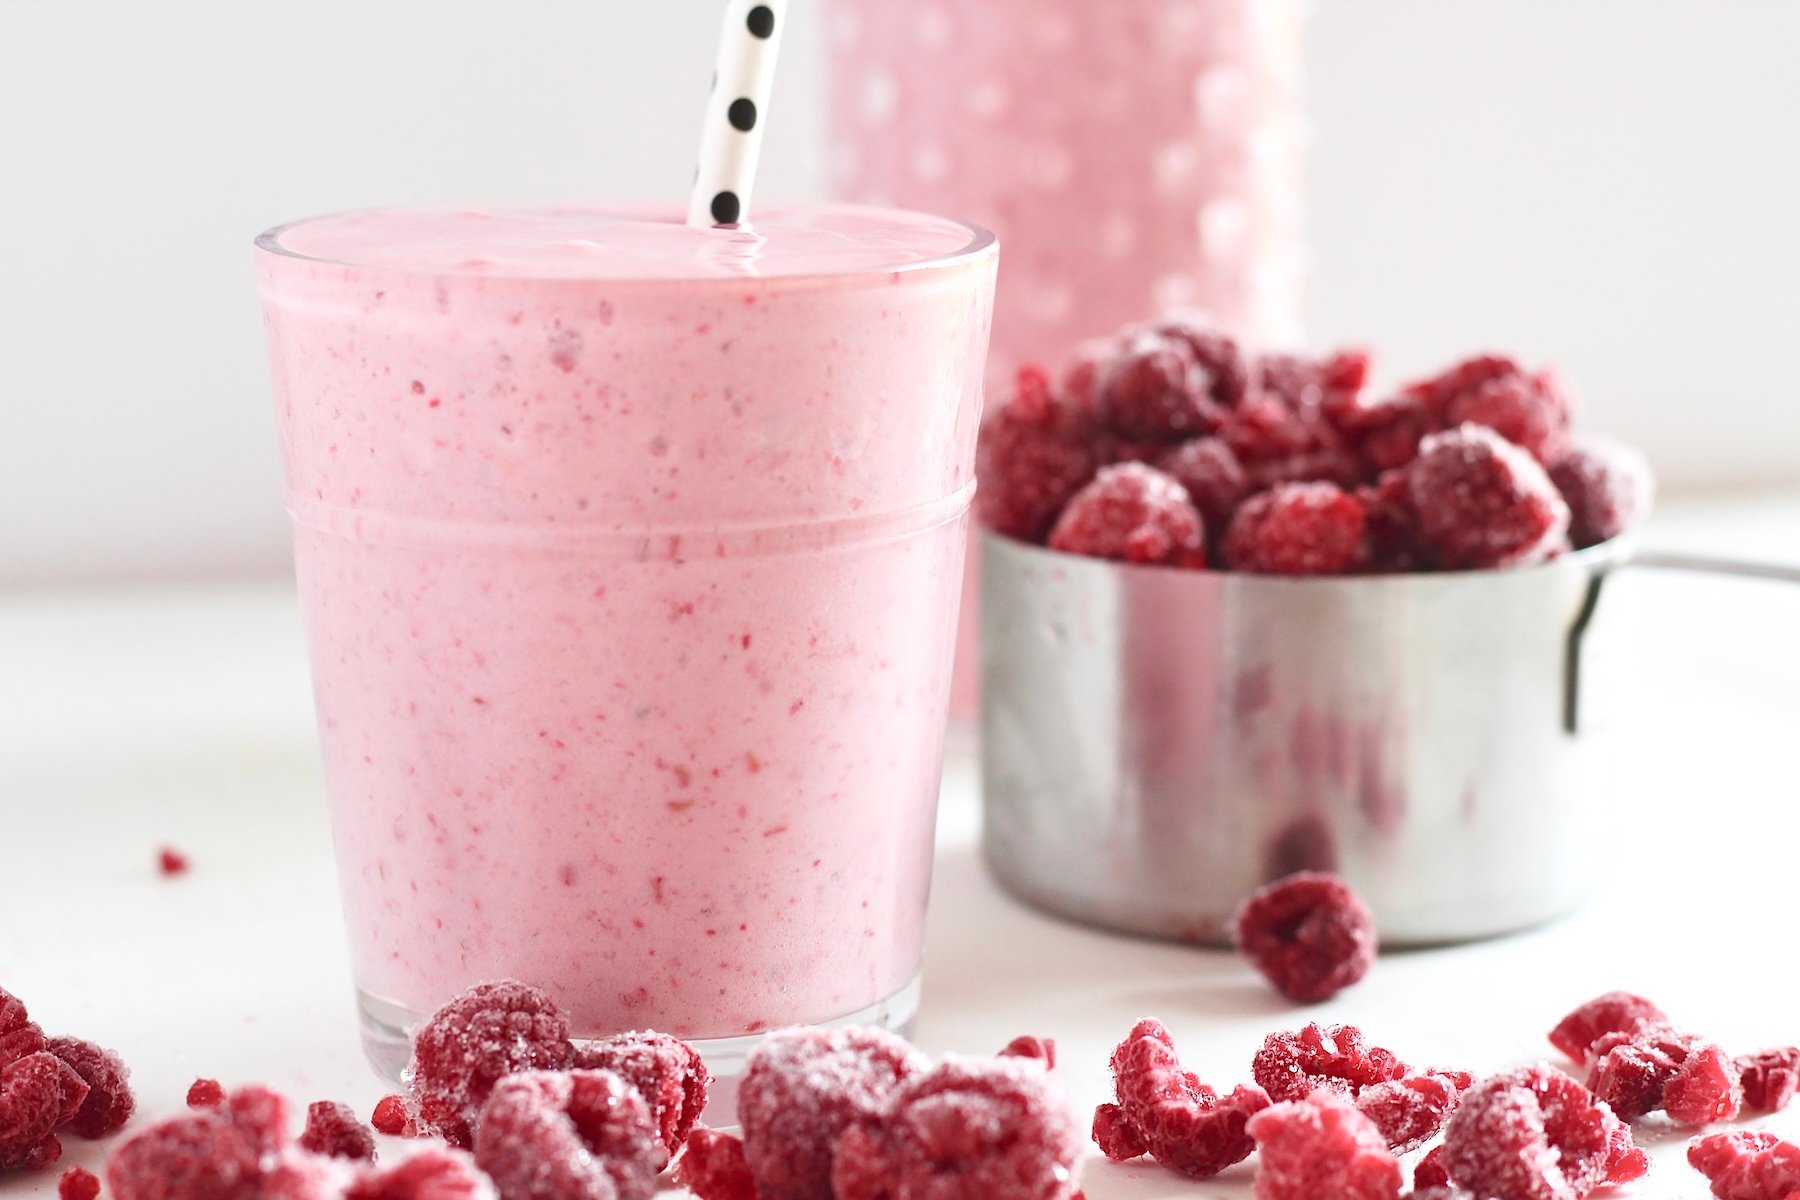 12 Low-sugar smoothie recipes to fuel your day